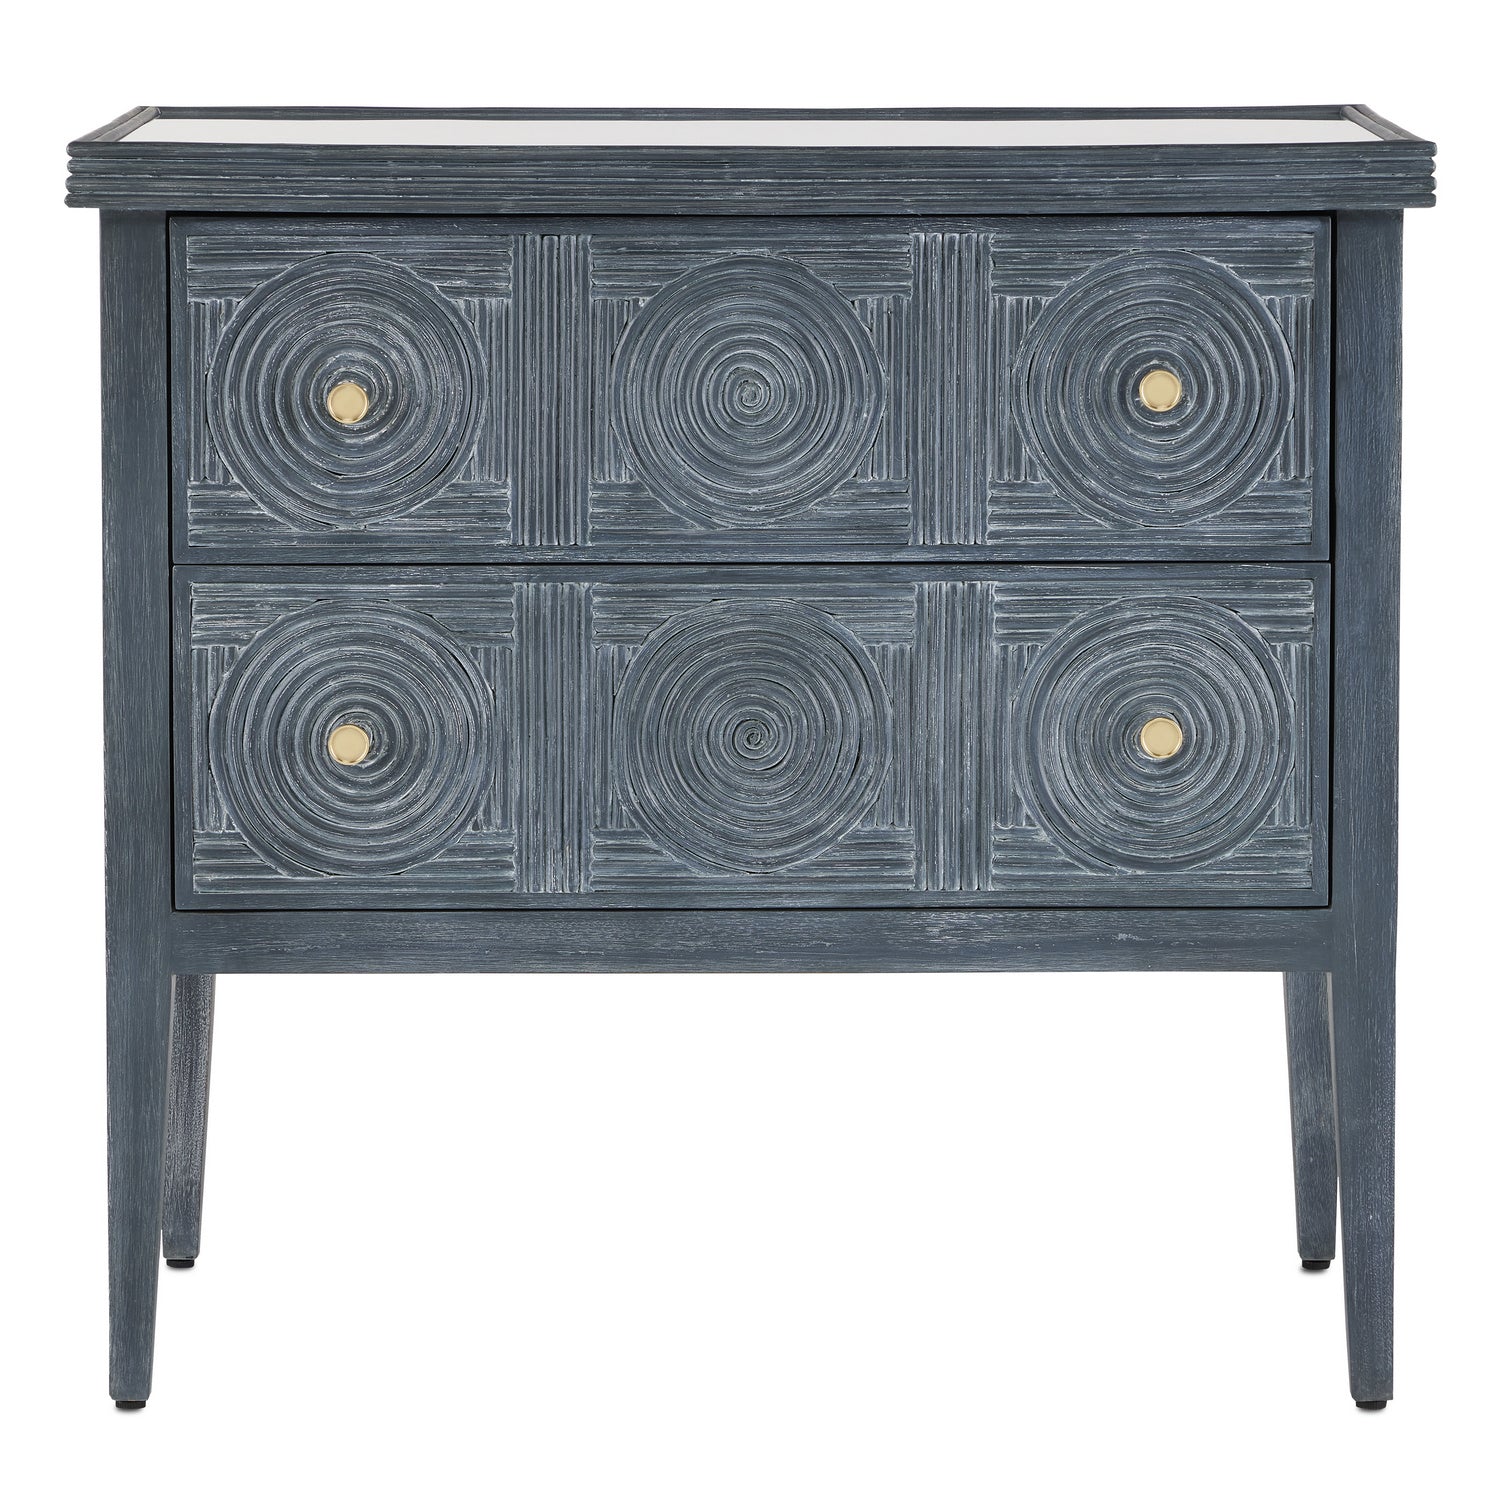 Chest from the Santos collection in Vintage Navy/Brushed Brass/Clear finish